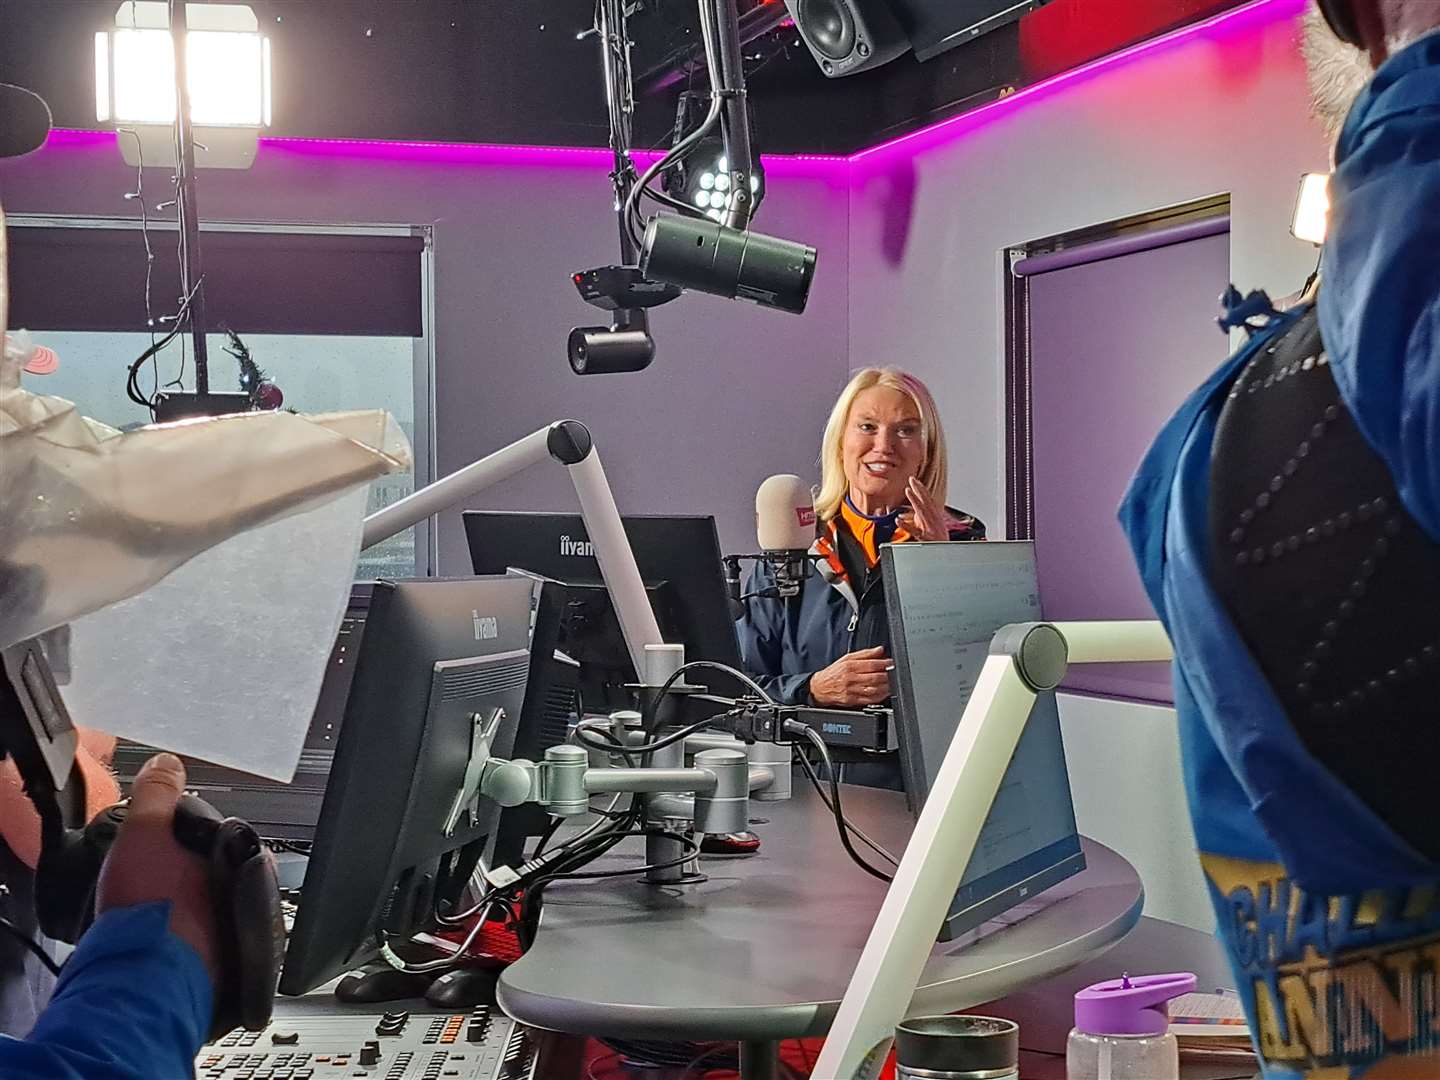 Anneka joined kmfm breakfast presenters Garry and Chelsea to appeal for help with the project